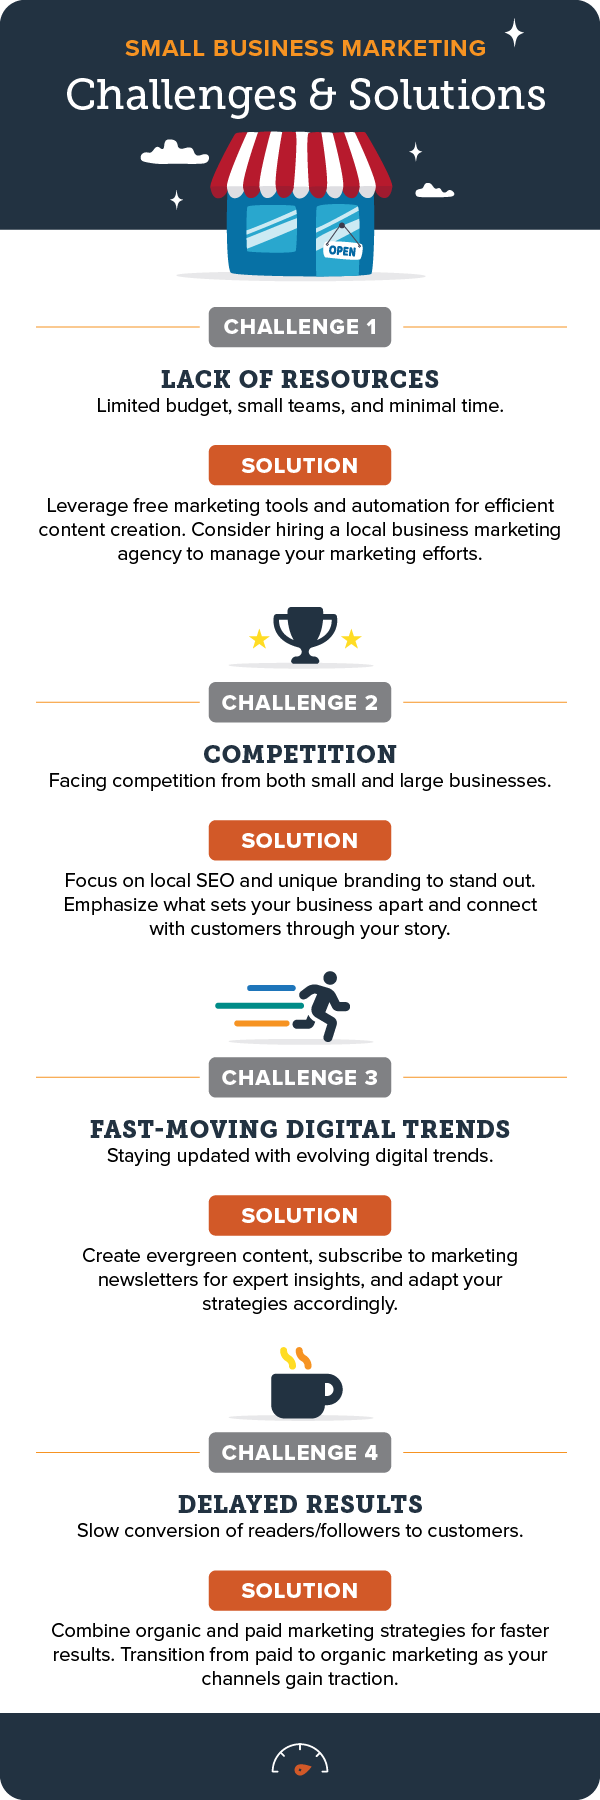 Infographic of top four small business marketing challenges and their solutions, including lack of resources, competition, trends, and delayed results